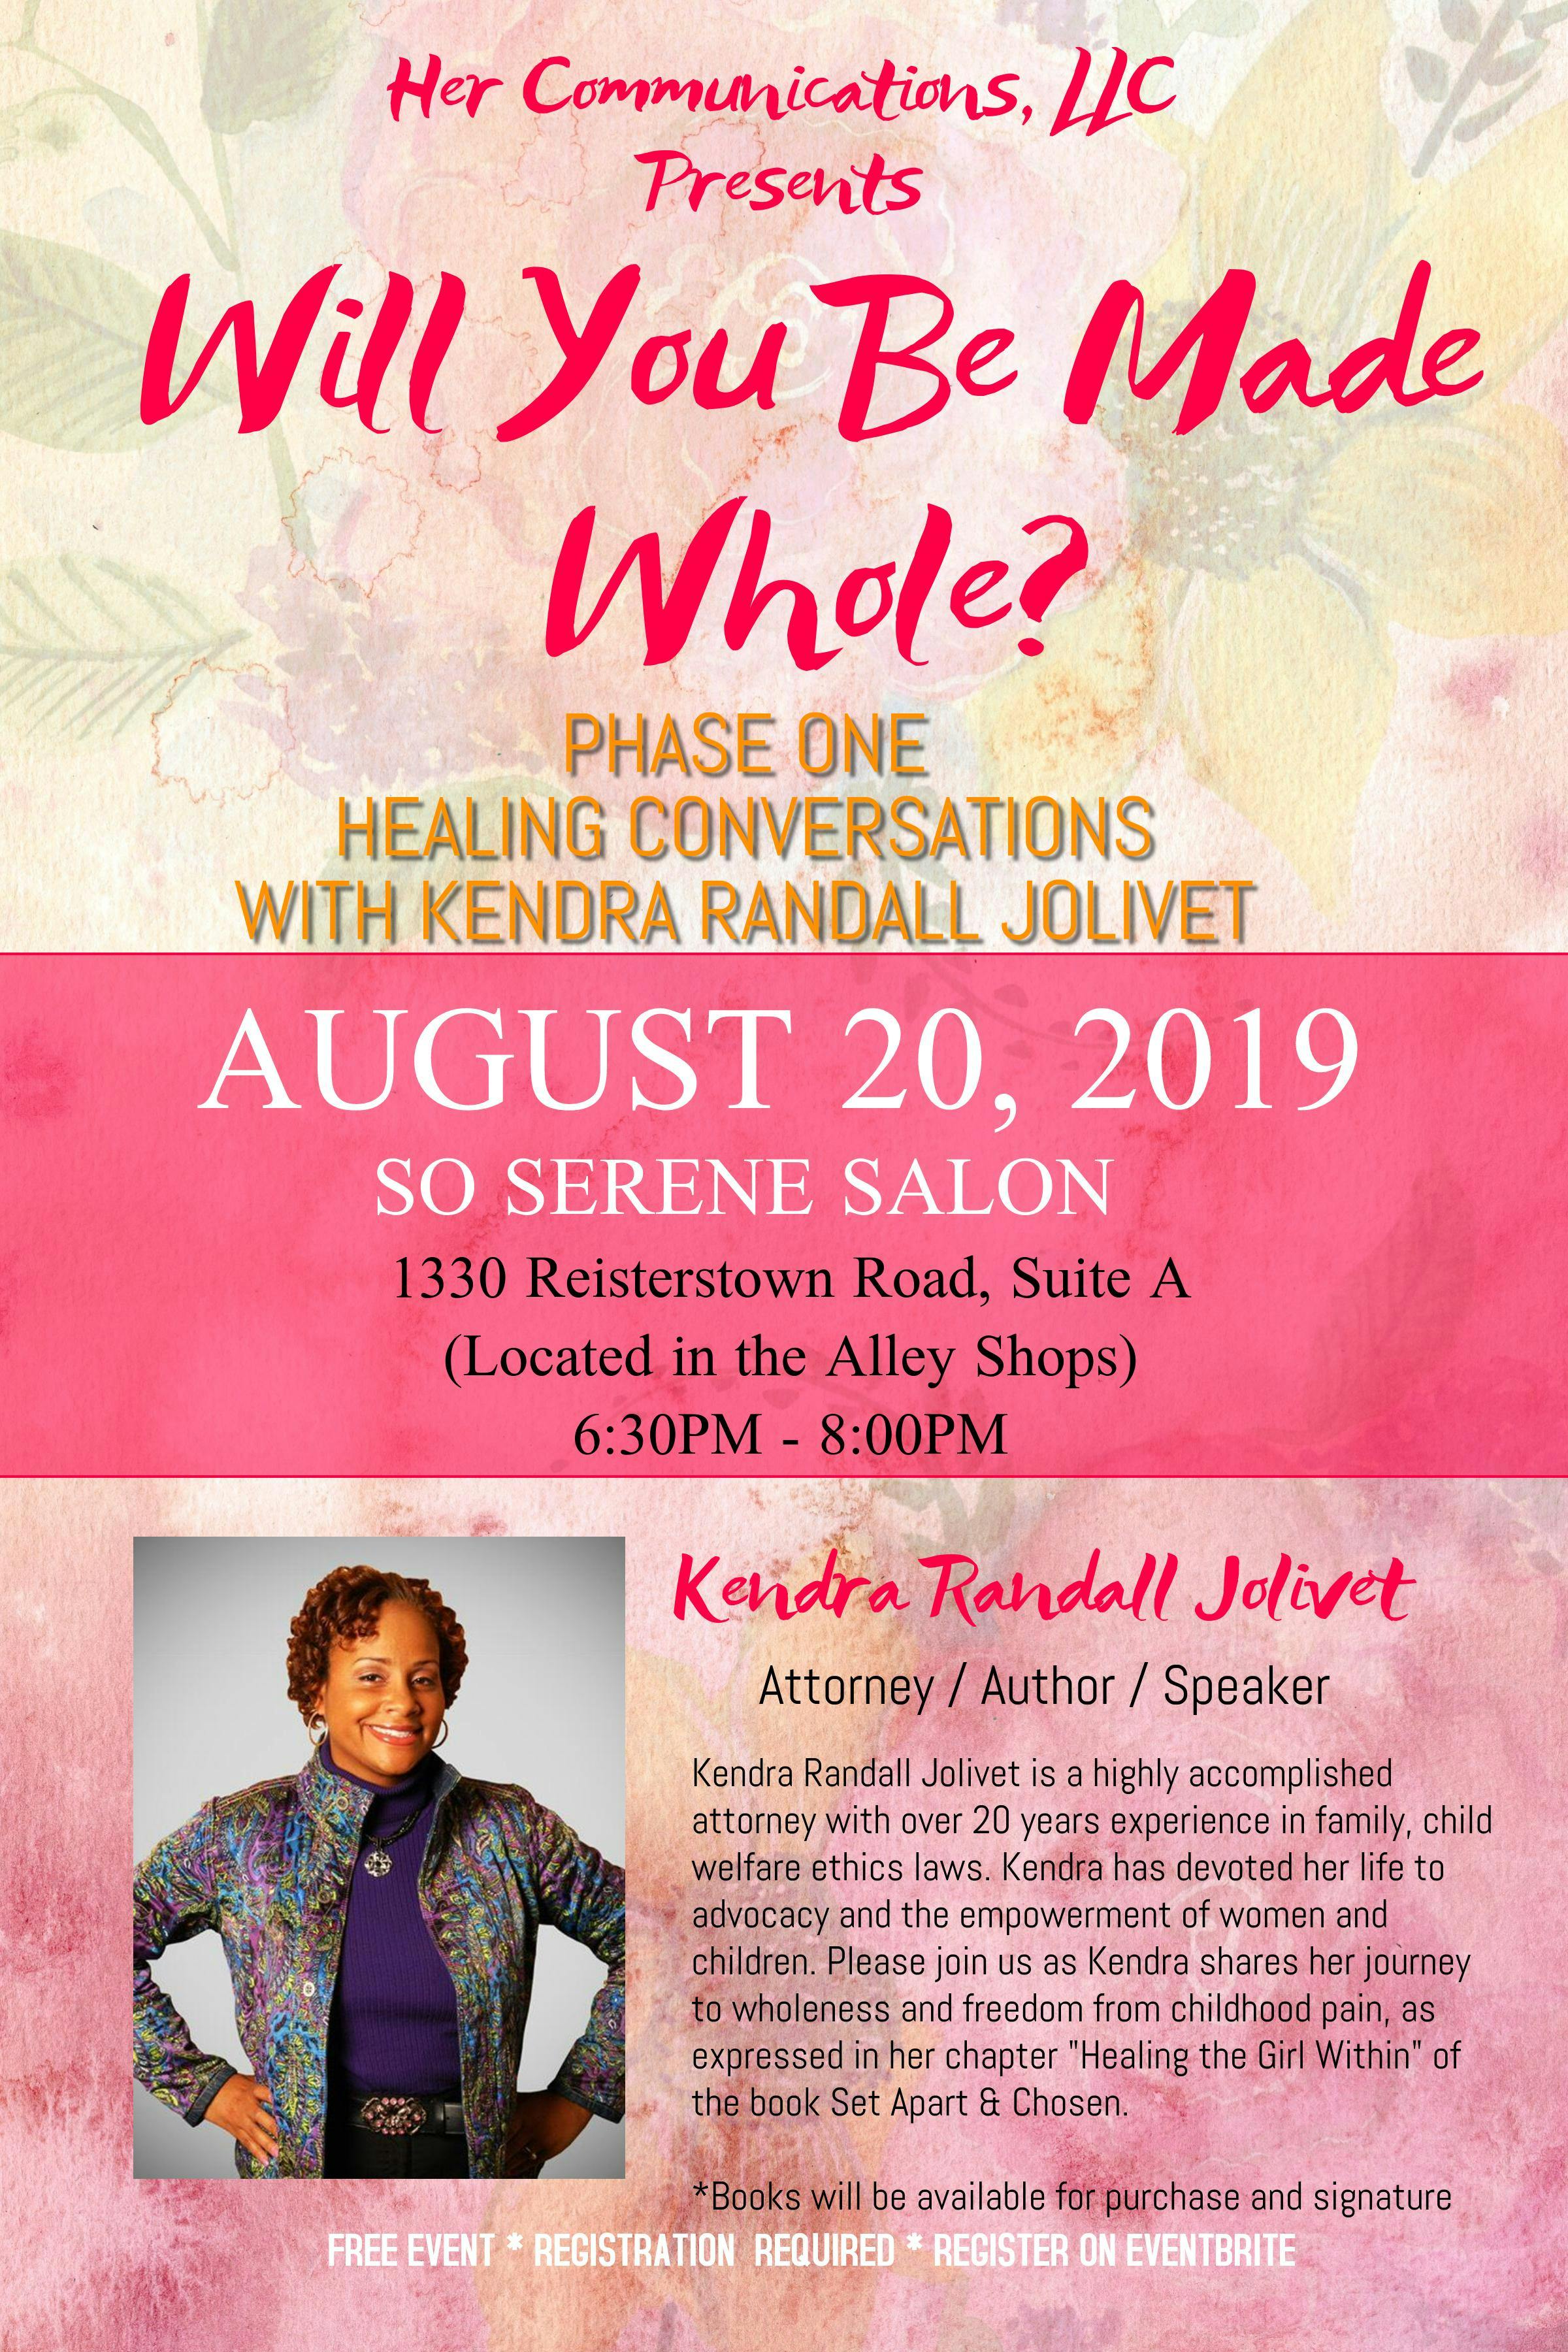 Will You Be Made Whole? Healing Conversations with Kendra Randall Jolivet